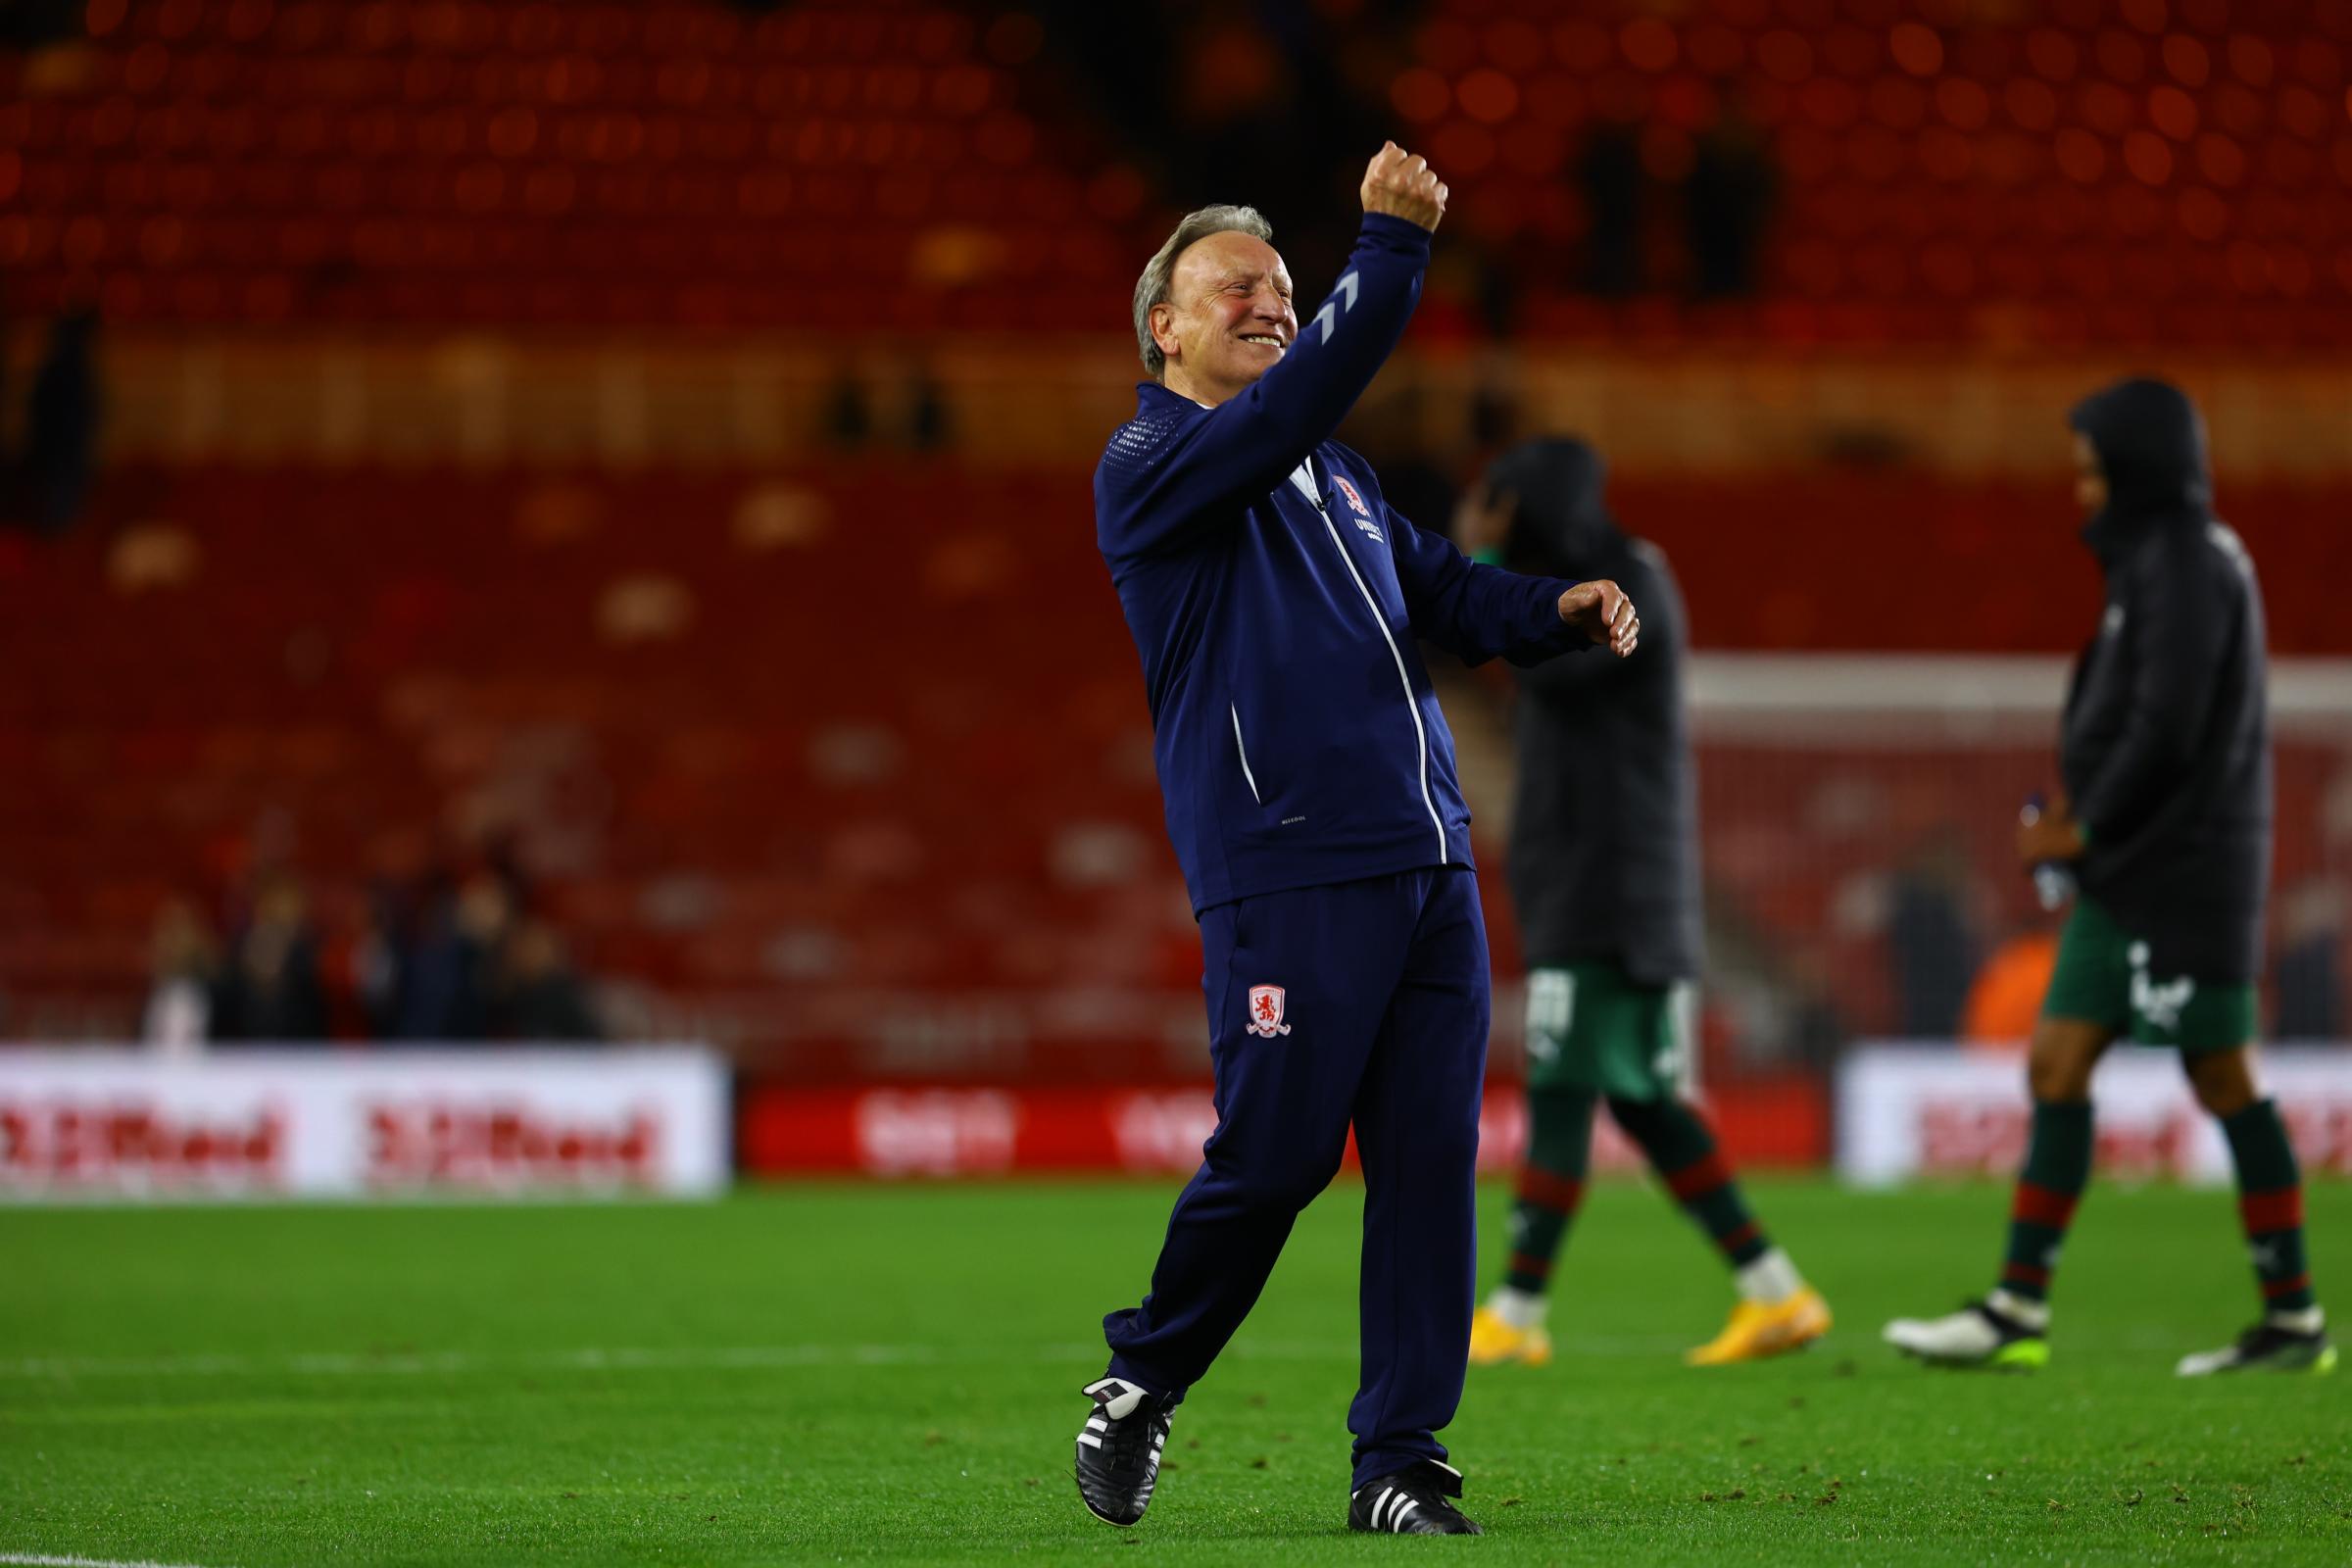 Neil Warnock hasn't ruled out getting another management job